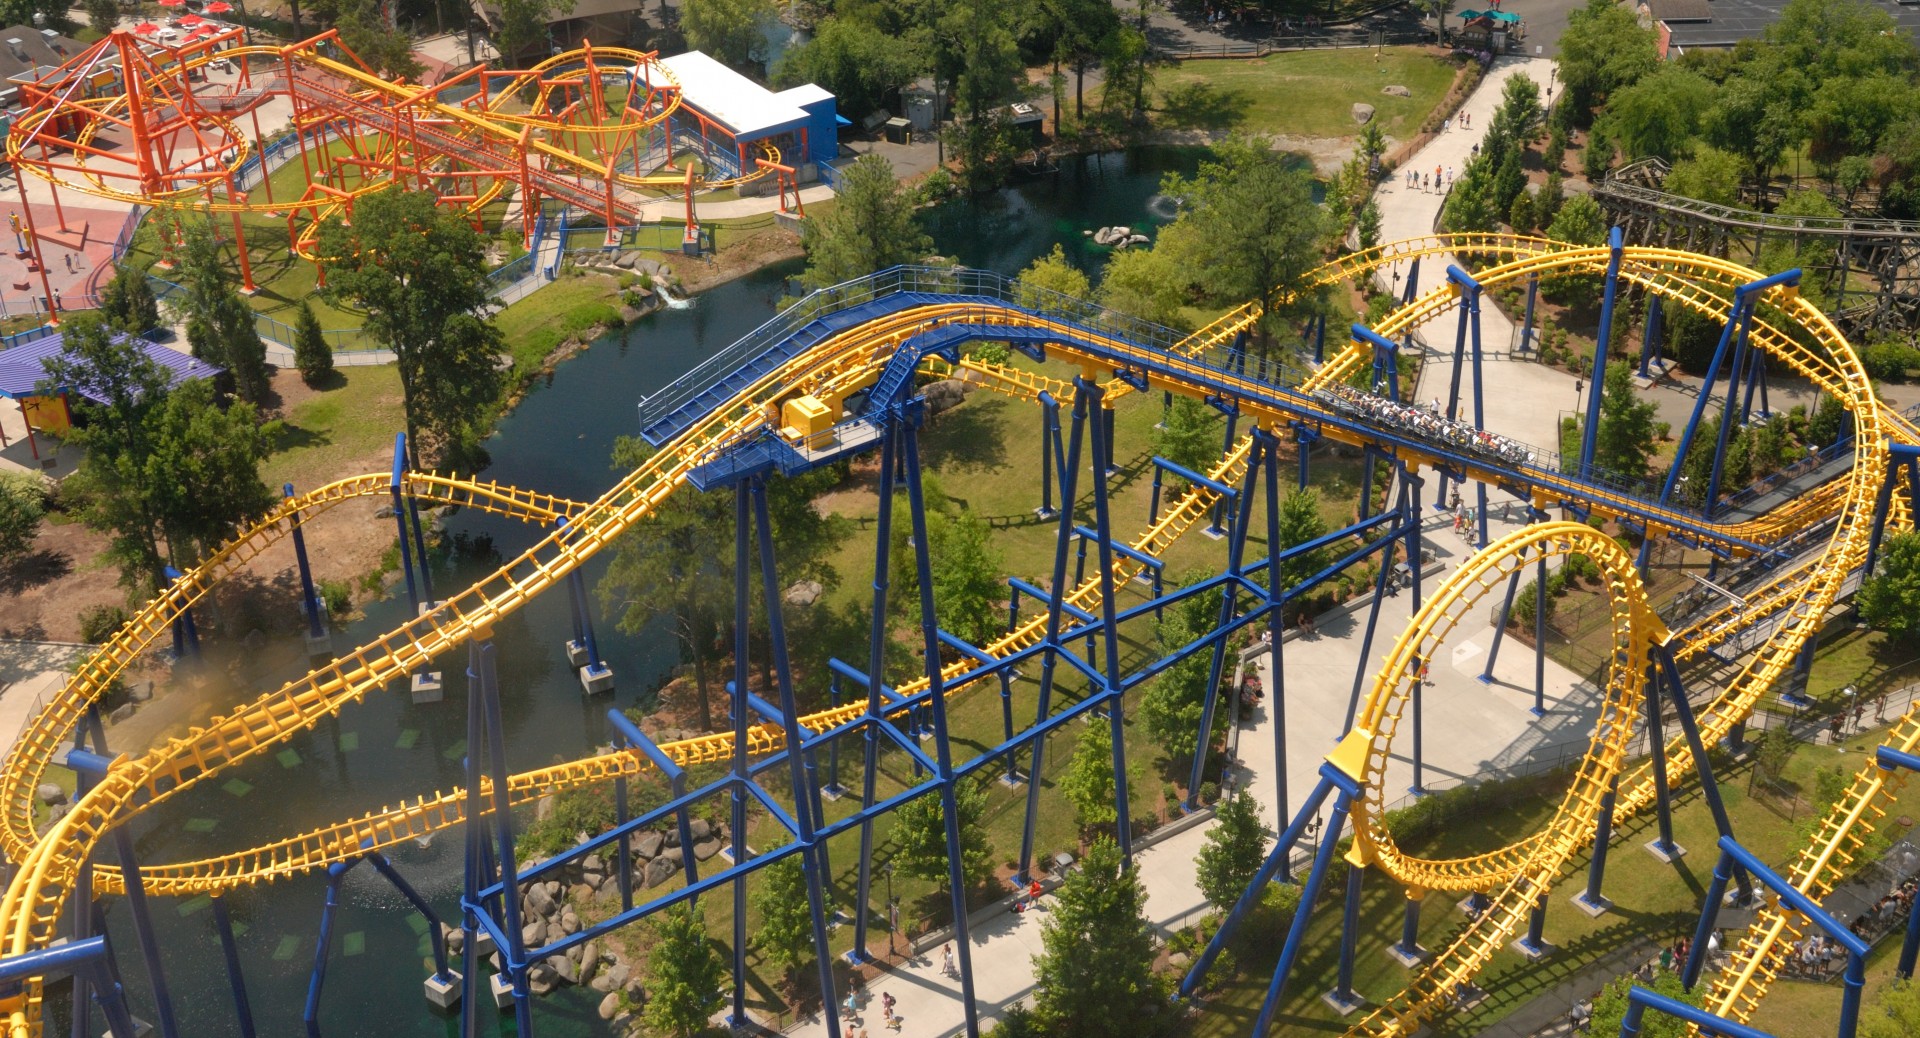 Aerial View Of Roller Coasters